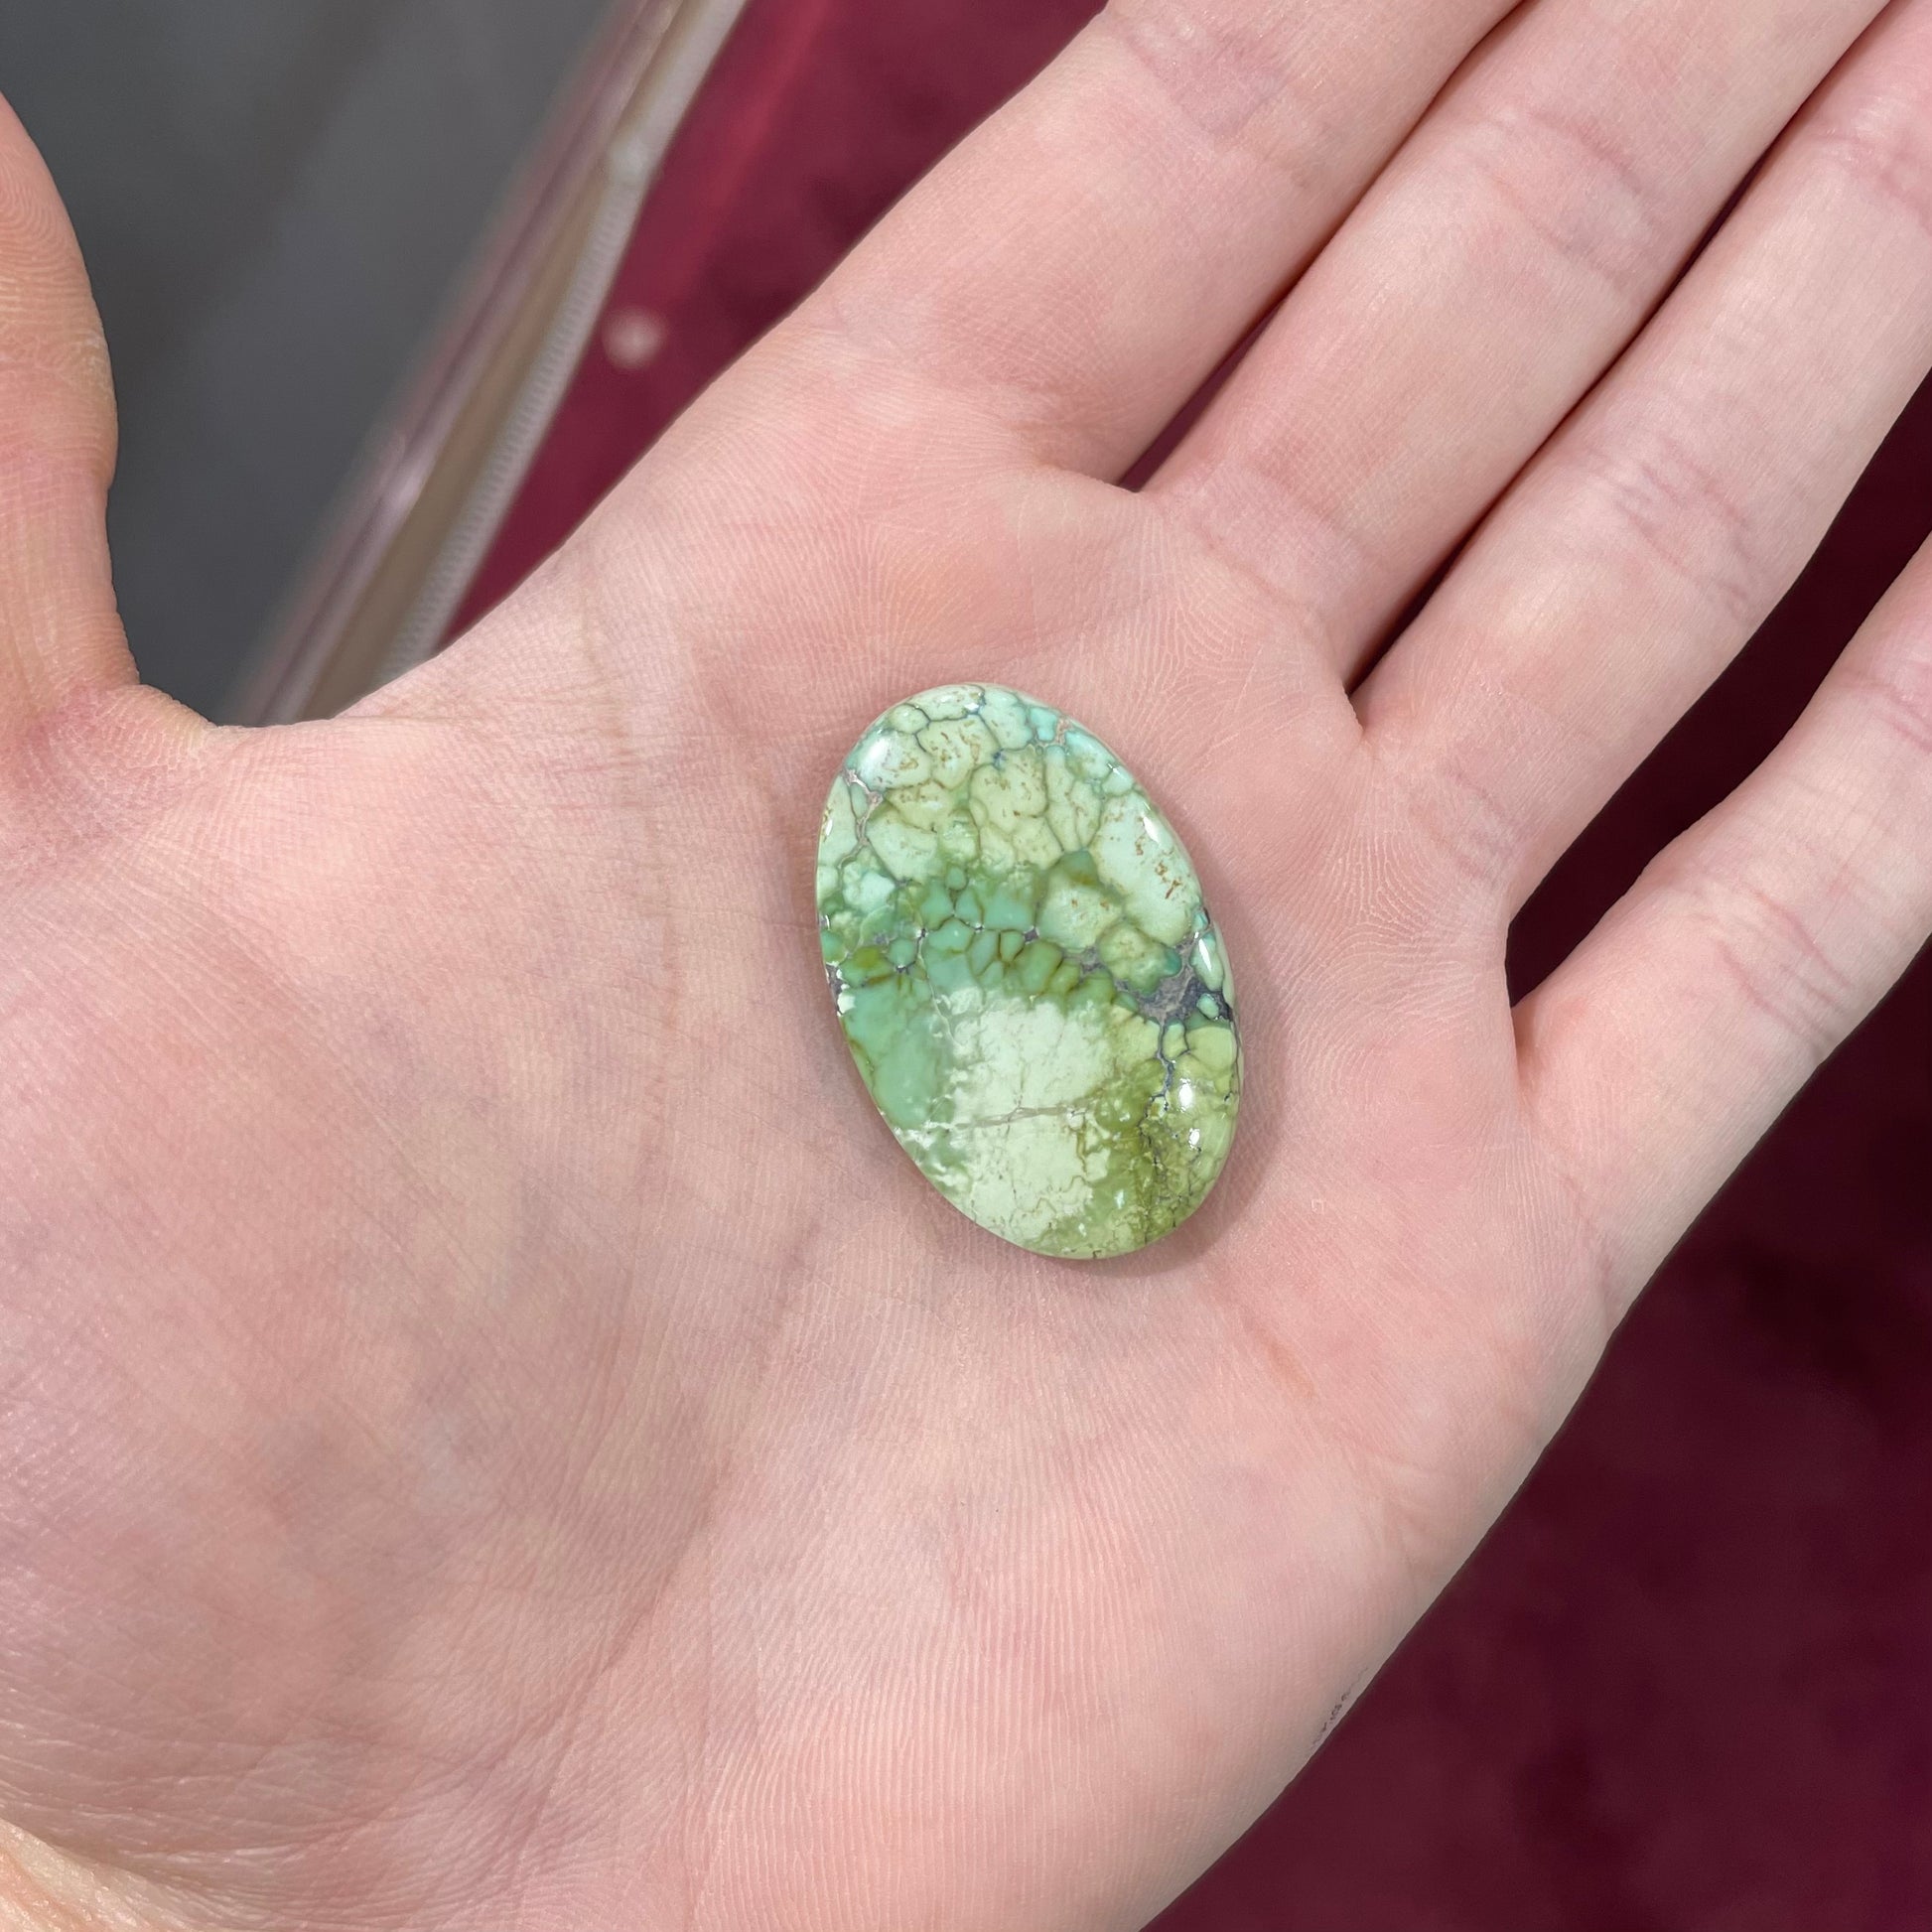 A loose, green turquoise stone cabochon from the Number 8 Mine.